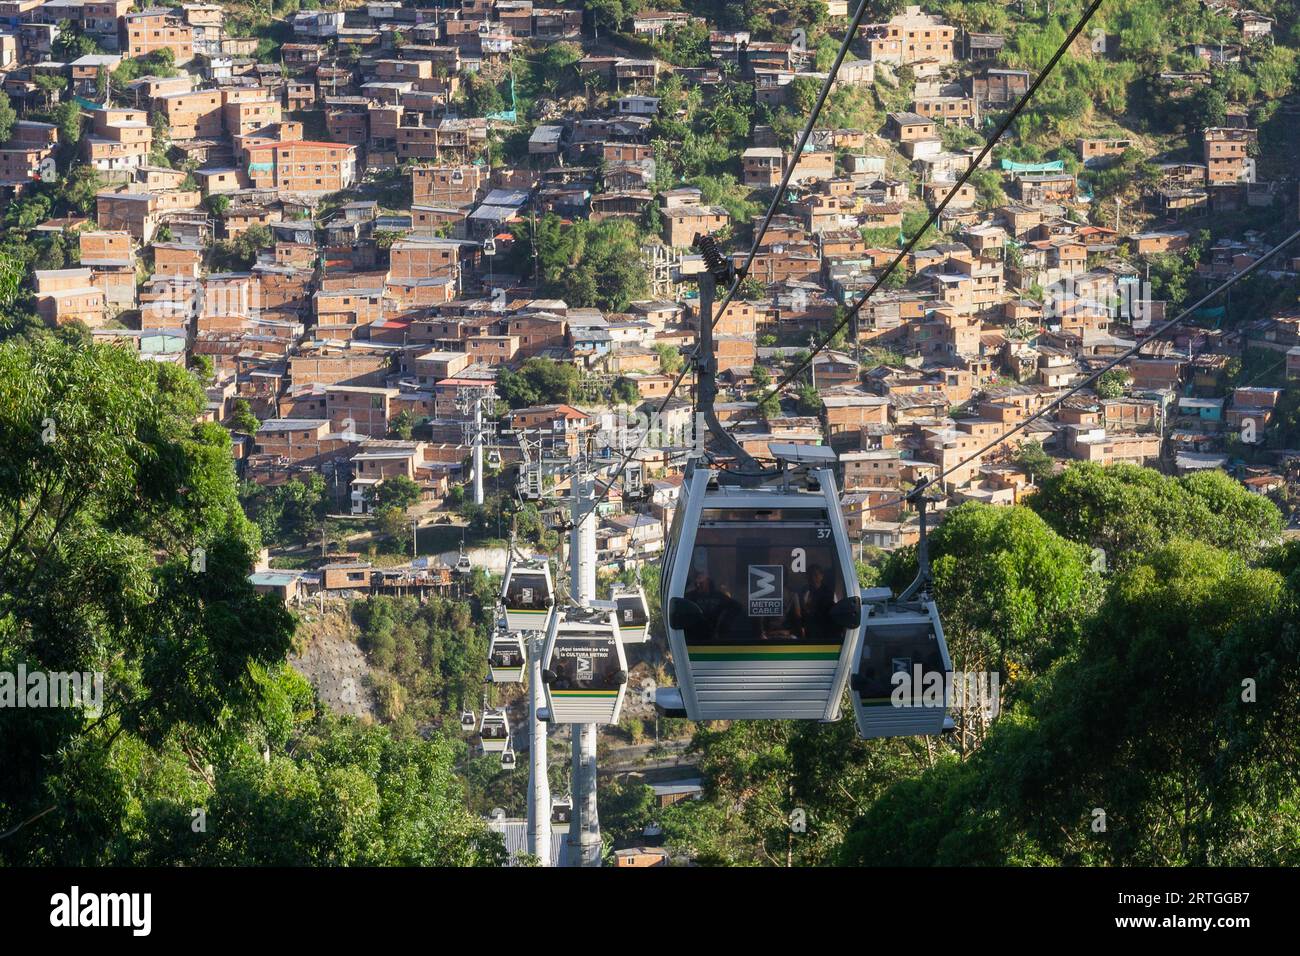 Cable car riding over informal neighbourhoods in Medellin, Antioquia, Colombia Stock Photo